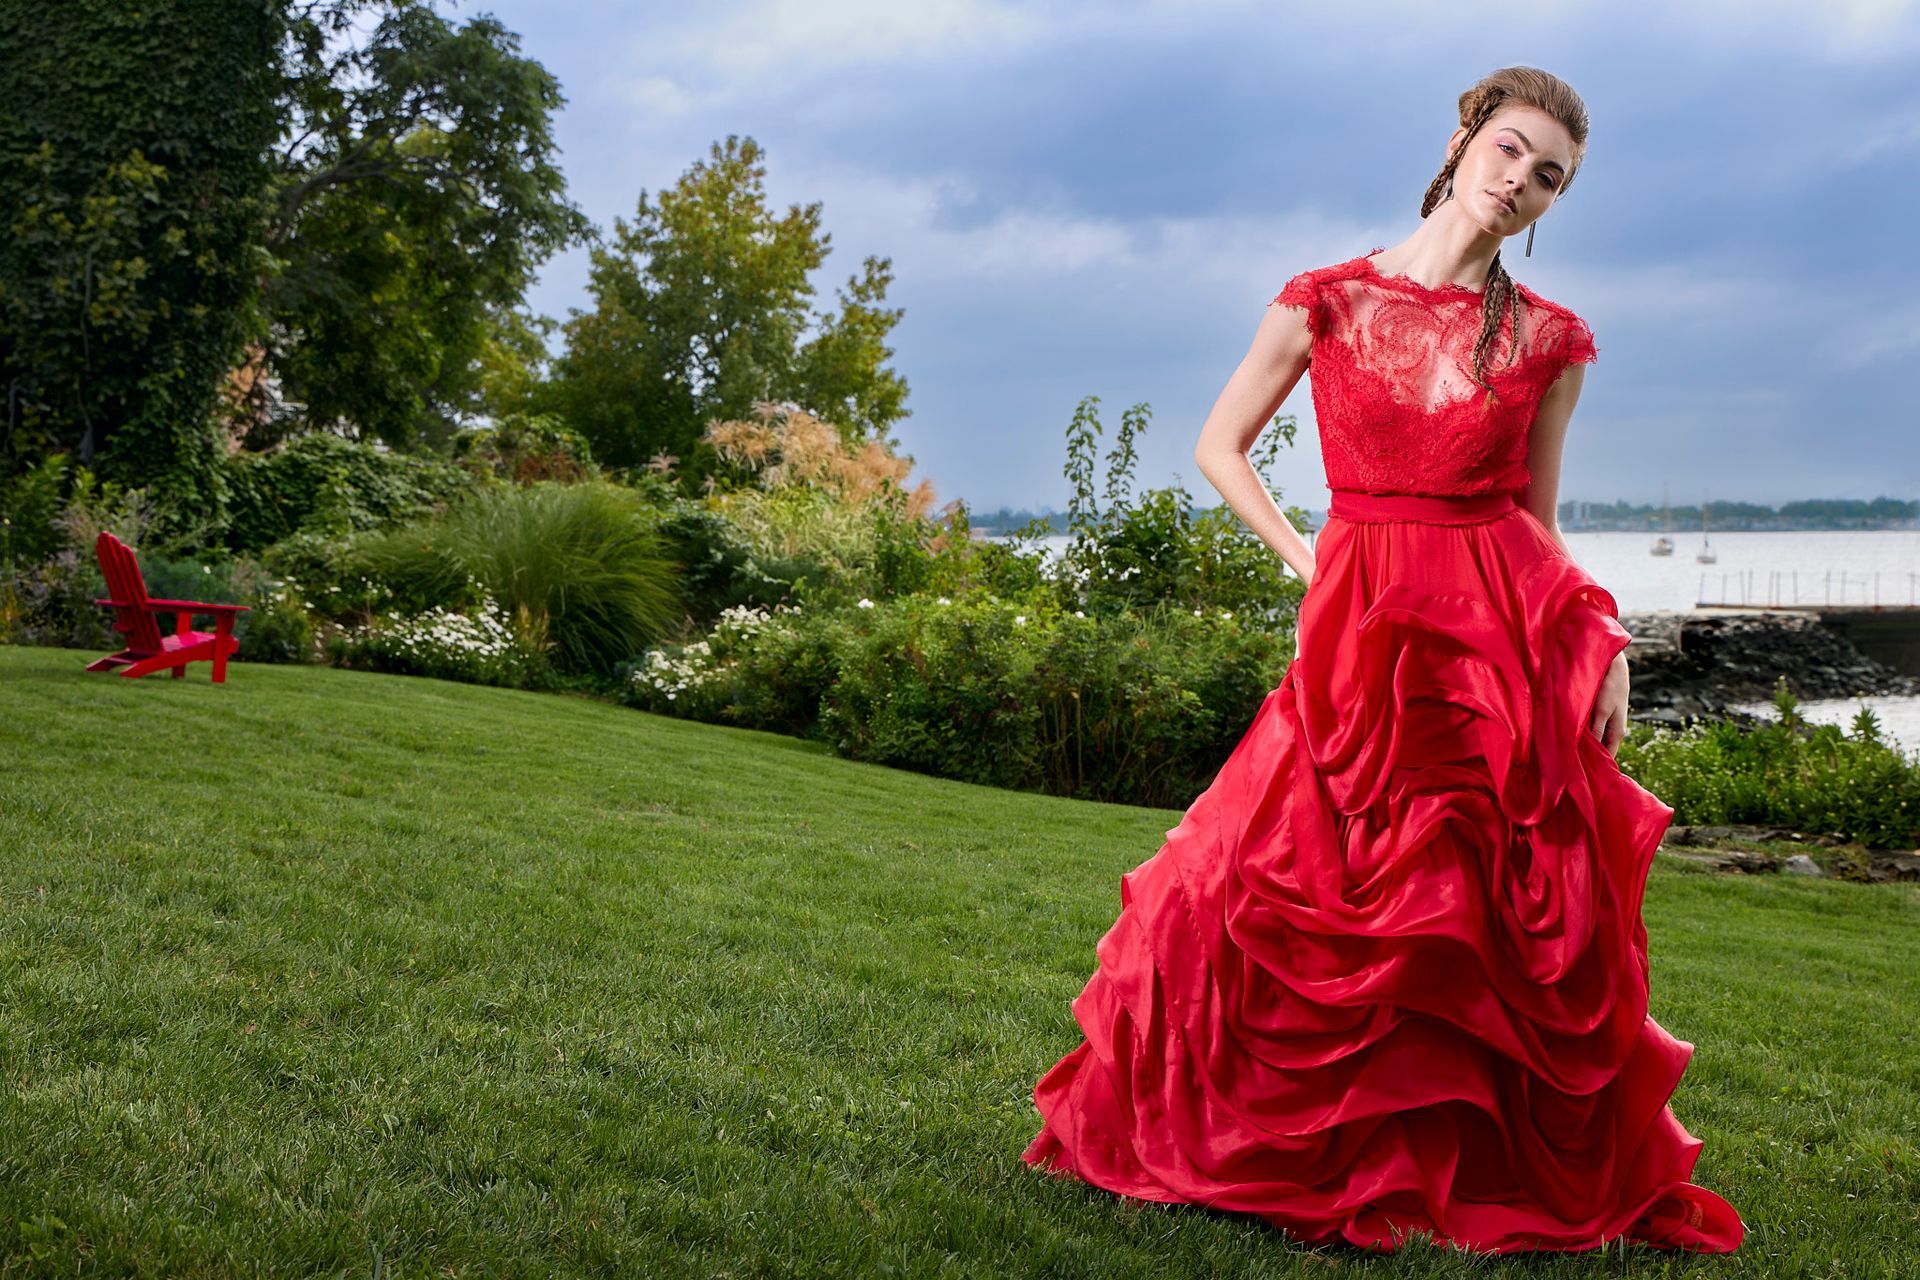 International vogue model in high-end evening gown. Standing in the grass near a body of water.